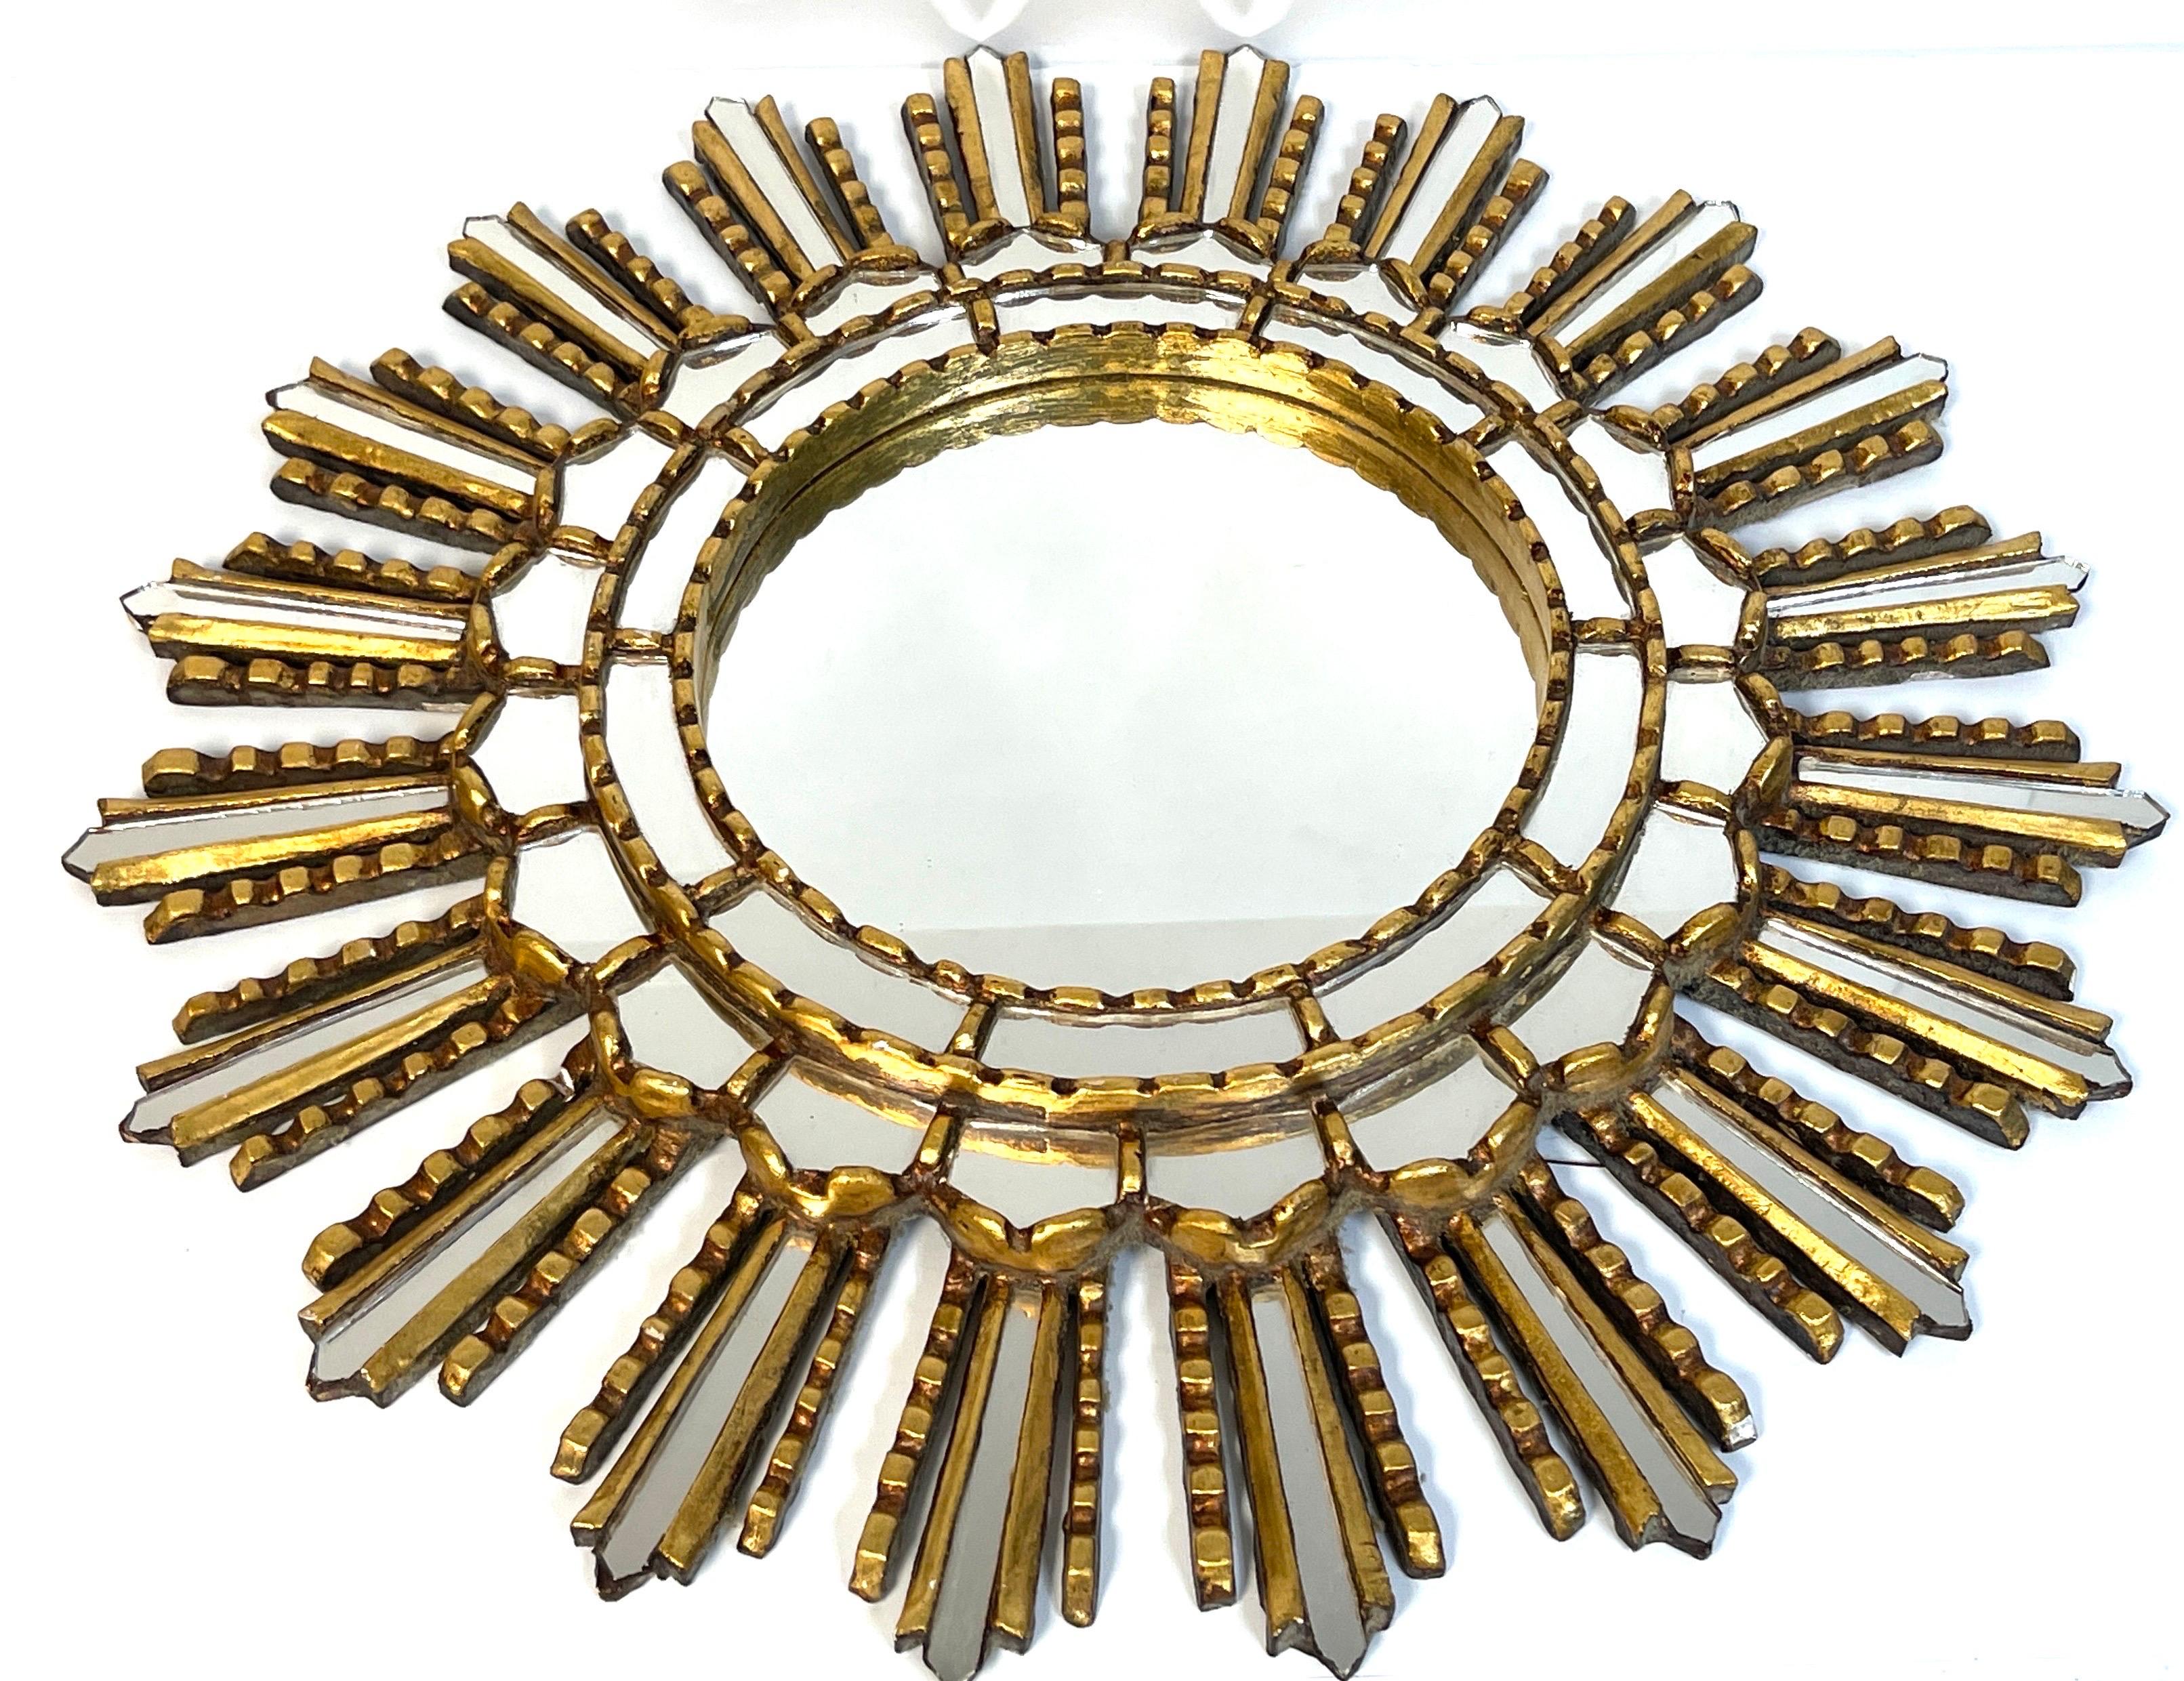 Italian modern giltwood sunburst mosaic mirror 
Italy, circa 1960s
Of good size with a 20-inch overall diameter, with inset 8-inch mirror, surrounded by a continuous two tiered giltwood inset mirror mosaics, the outer layer with
alternating rays